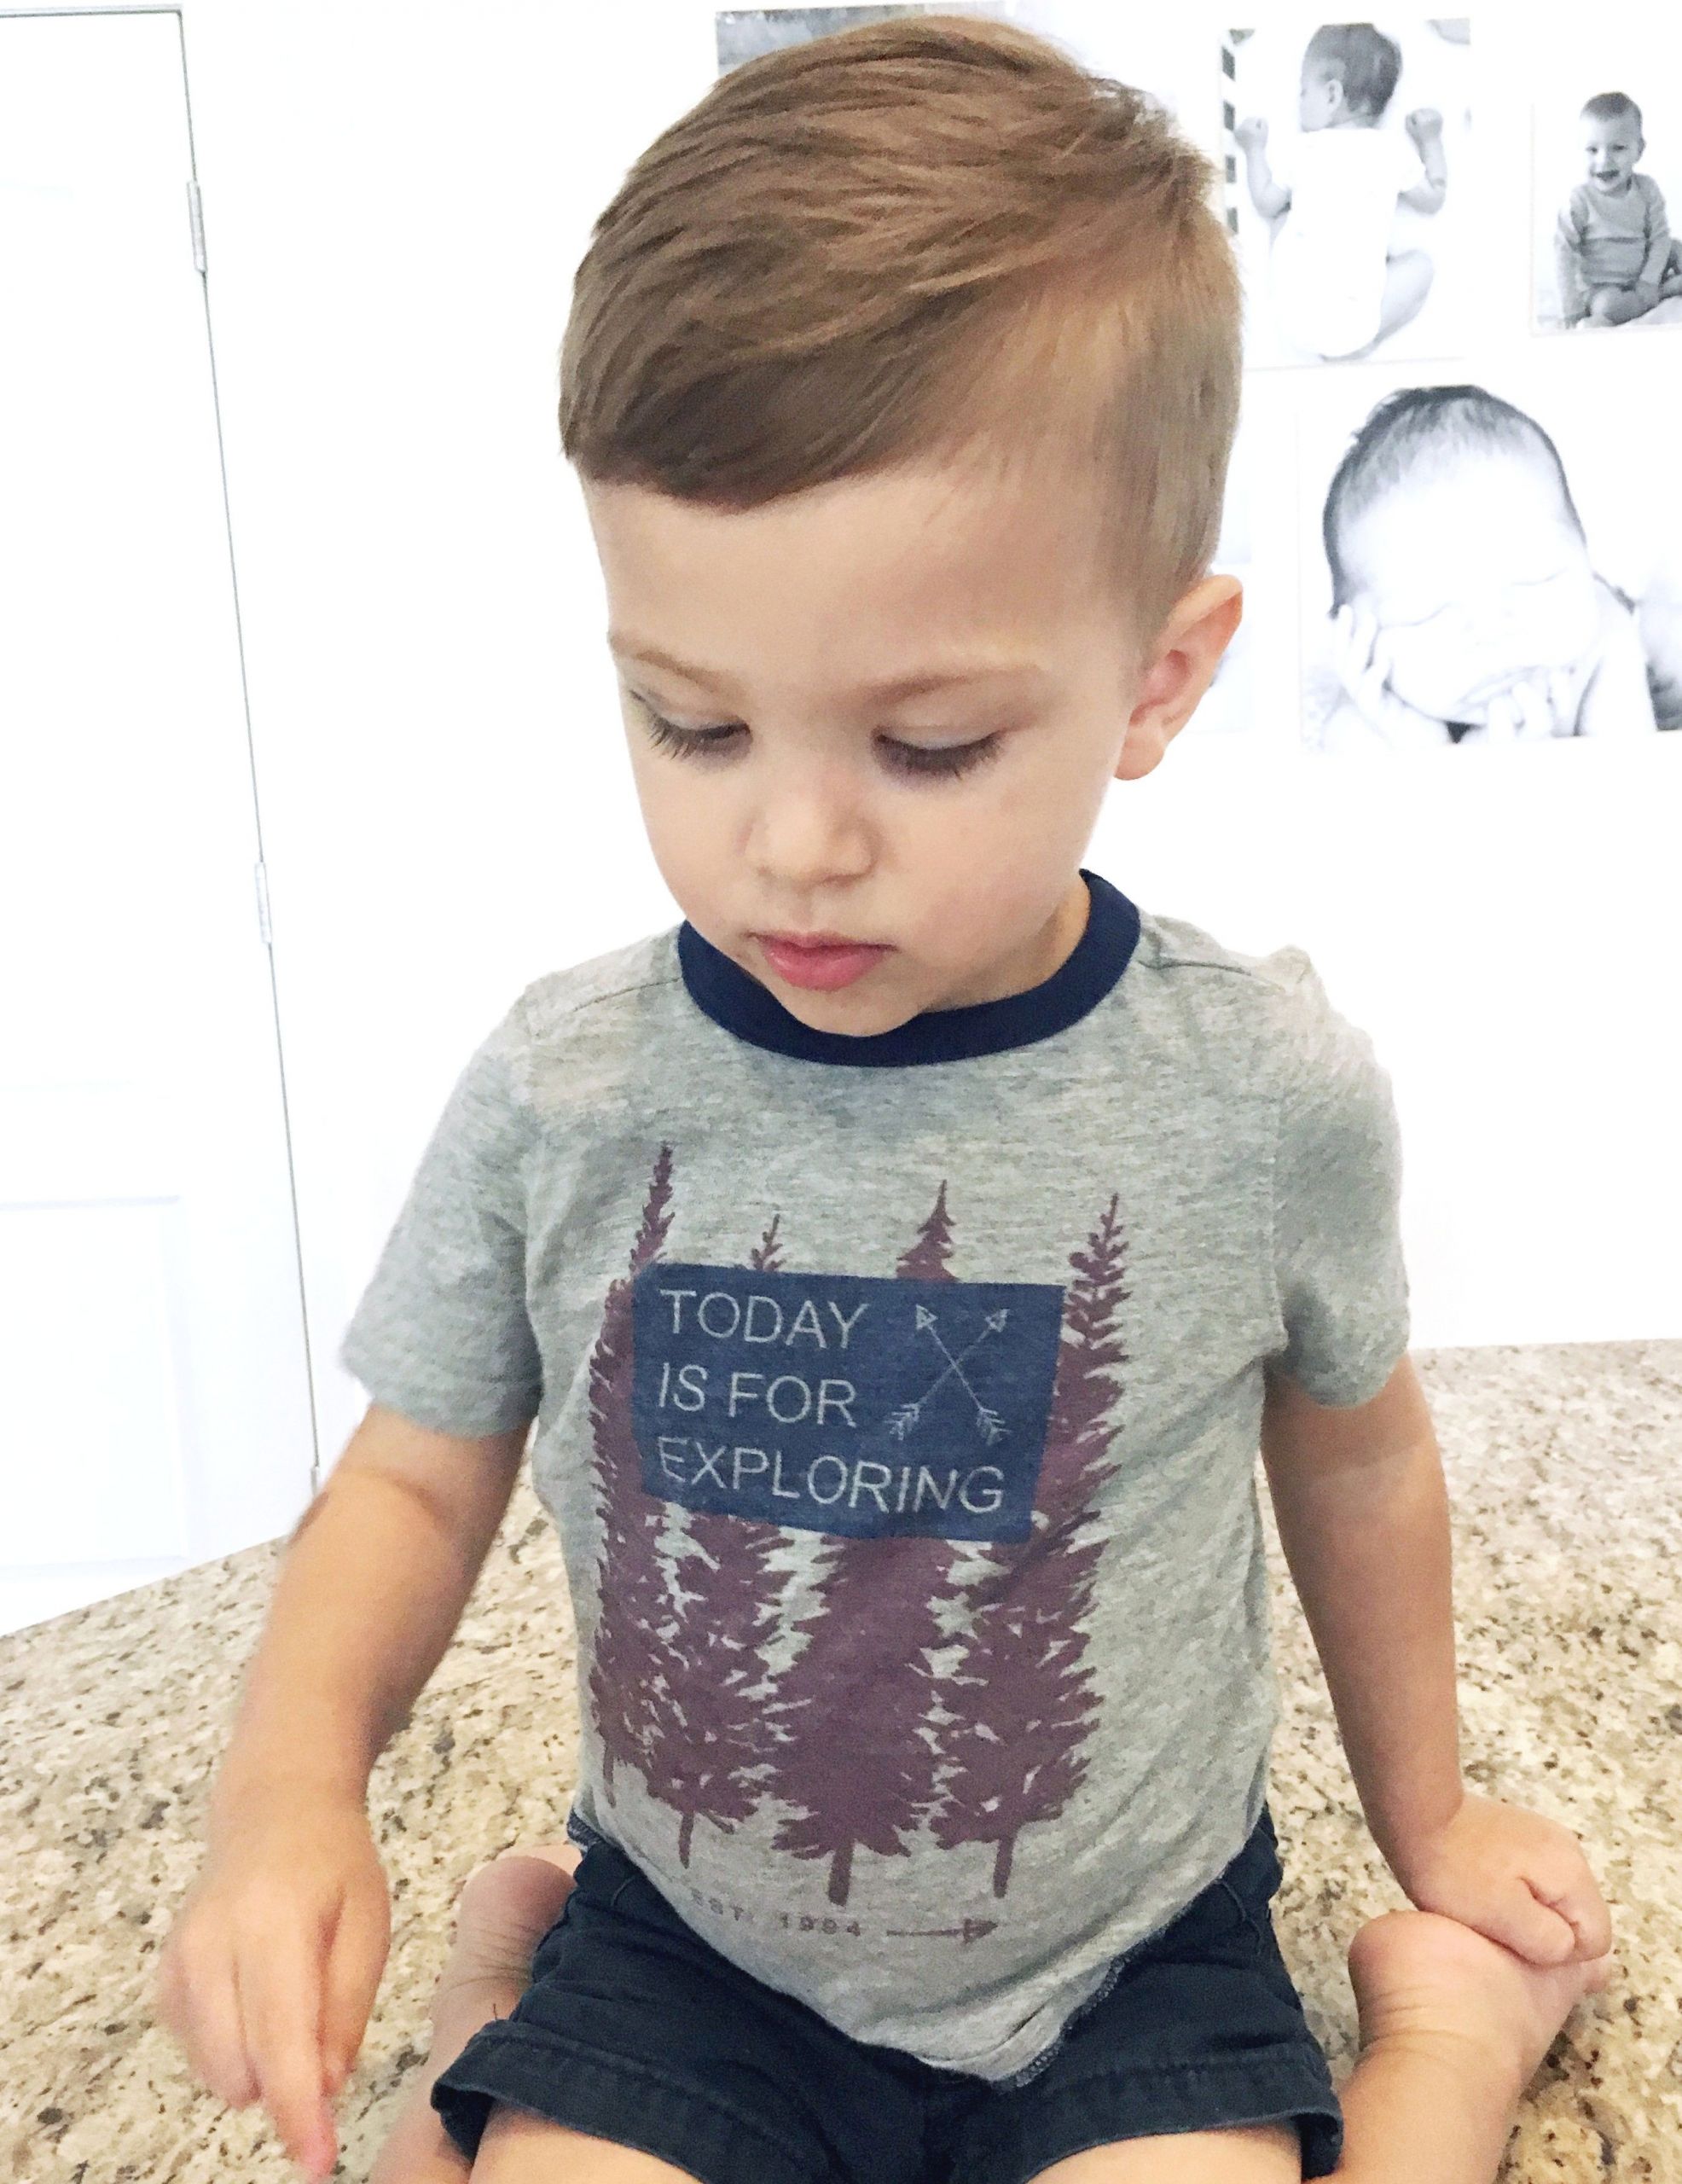 23 Ideas for 1 Year Old Baby Boy Hairstyles - Home, Family, Style and ...